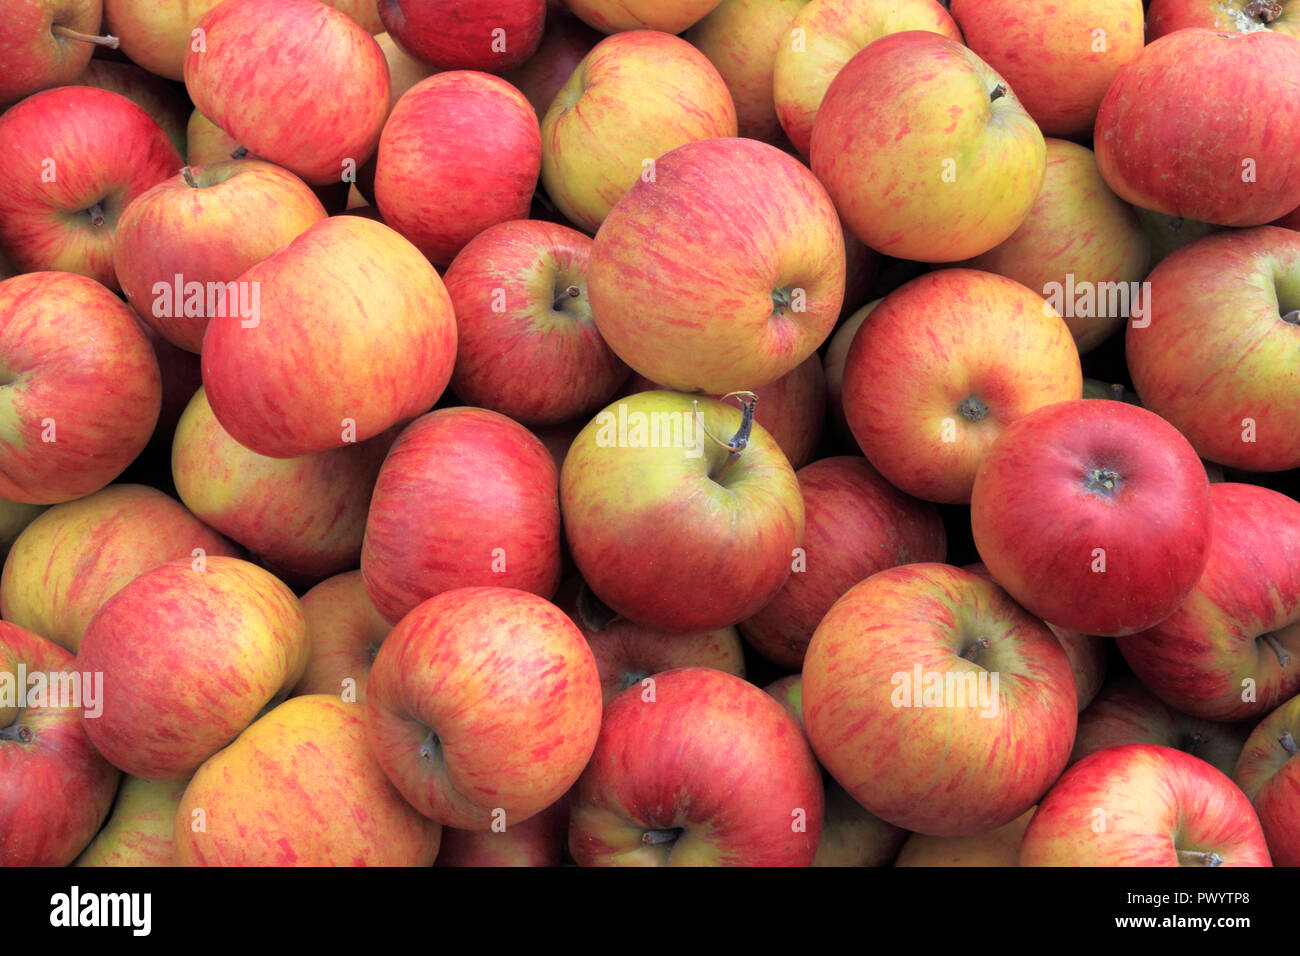 Apple 'Perfection', apples, malus domestica, farm shop, display, named variety Stock Photo